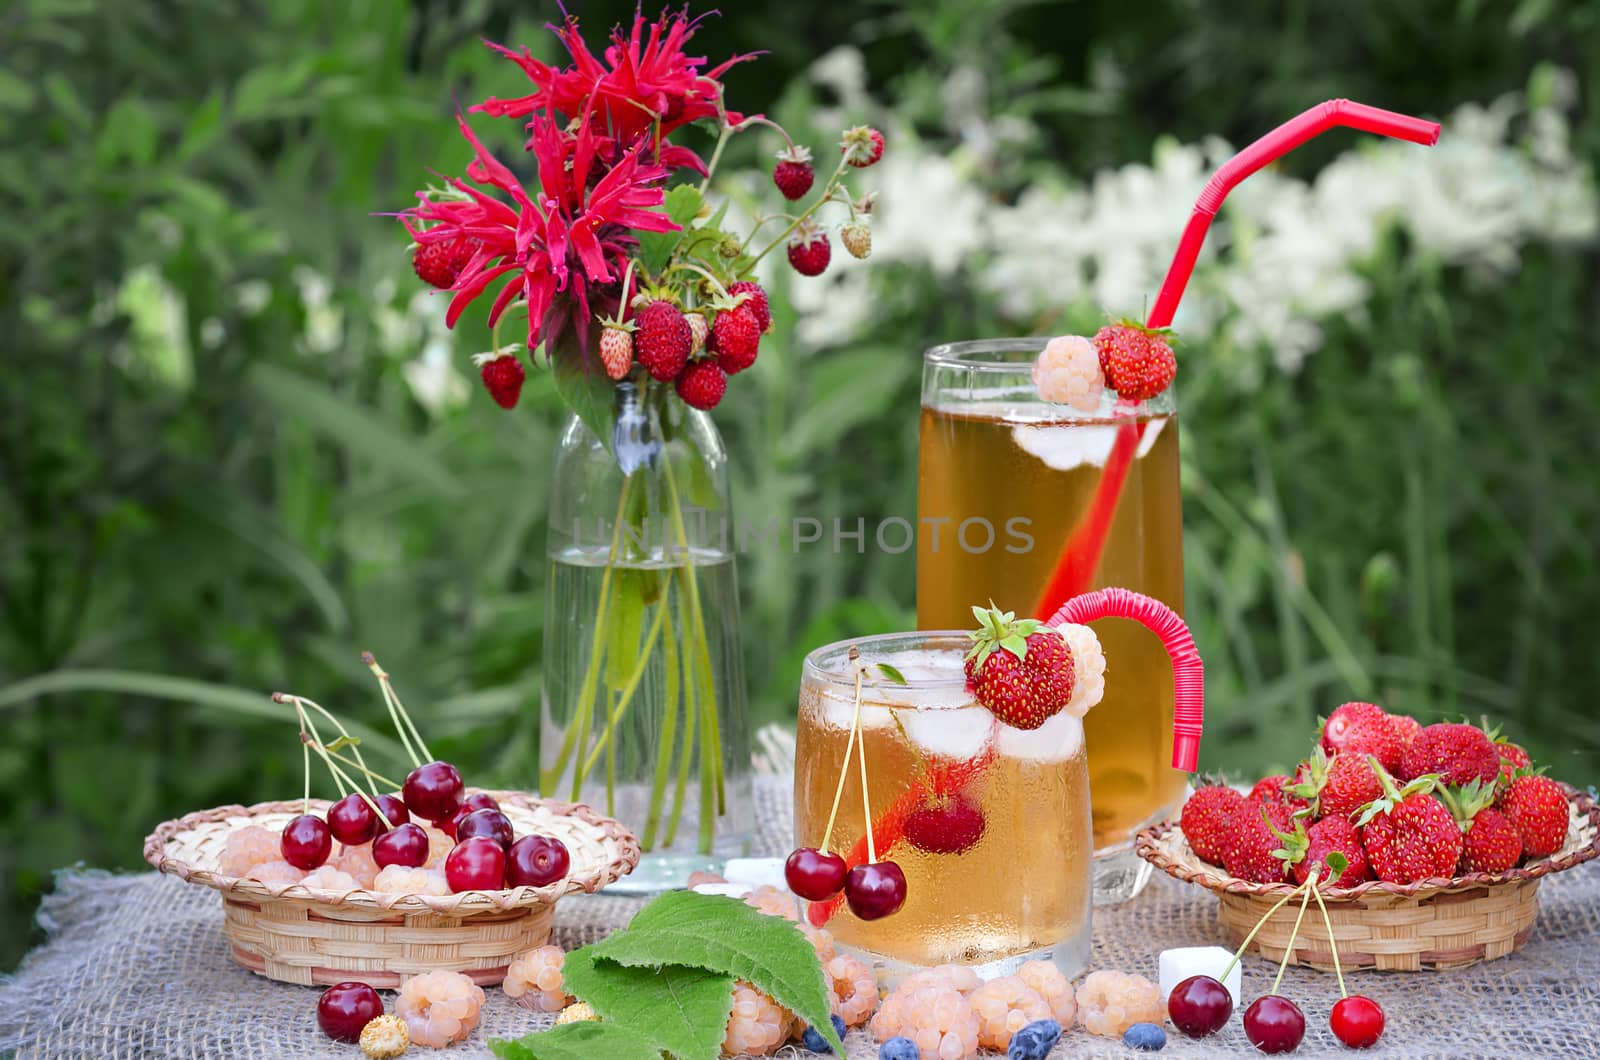 Iced tea and different berries on the table in the garden.